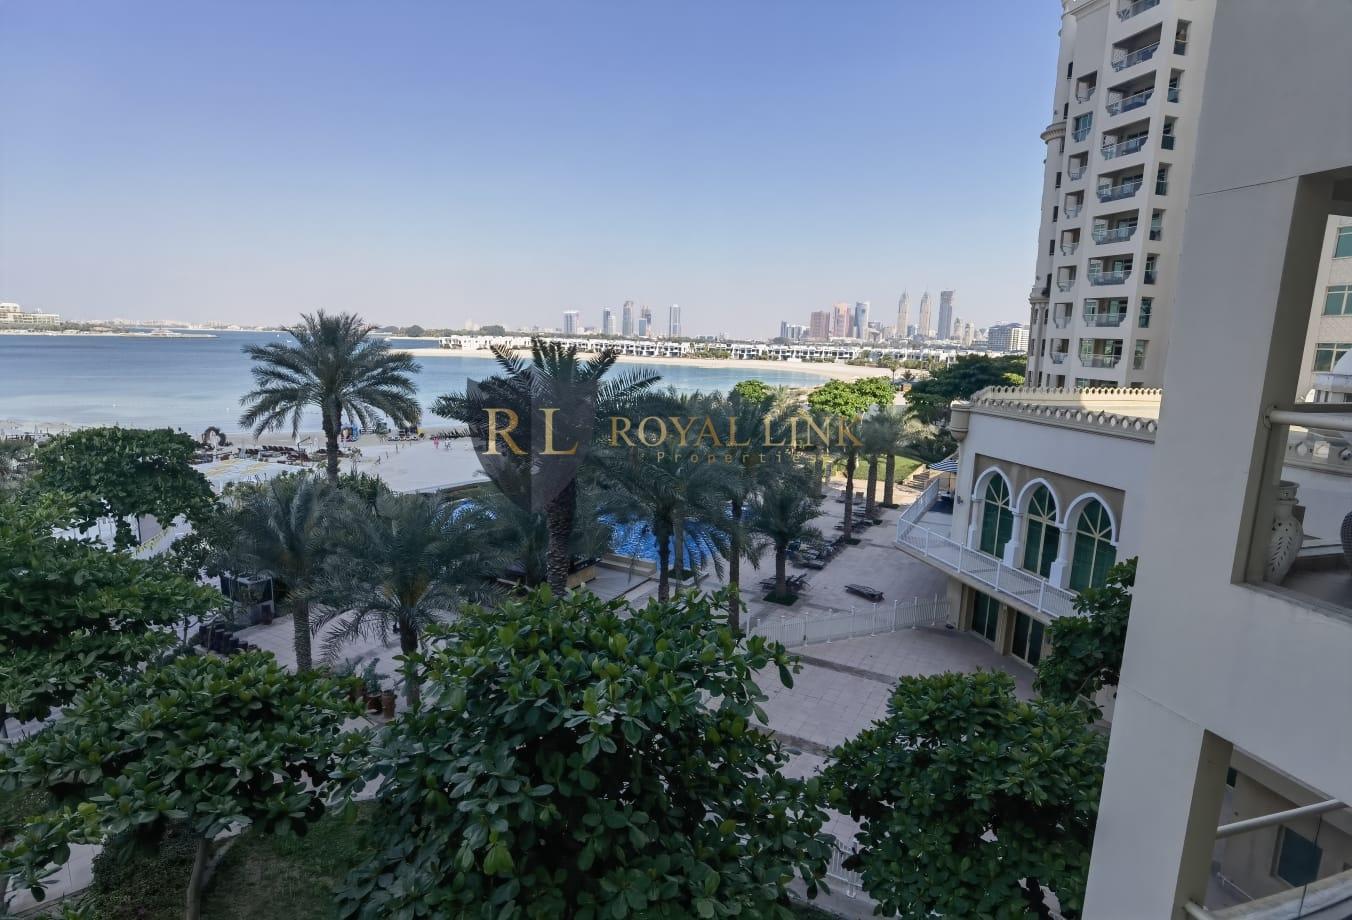 2 bed, 3 bath Apartment for rent in Al Das, Shoreline Apartments, Palm Jumeirah, Dubai for price AED 285000 yearly 